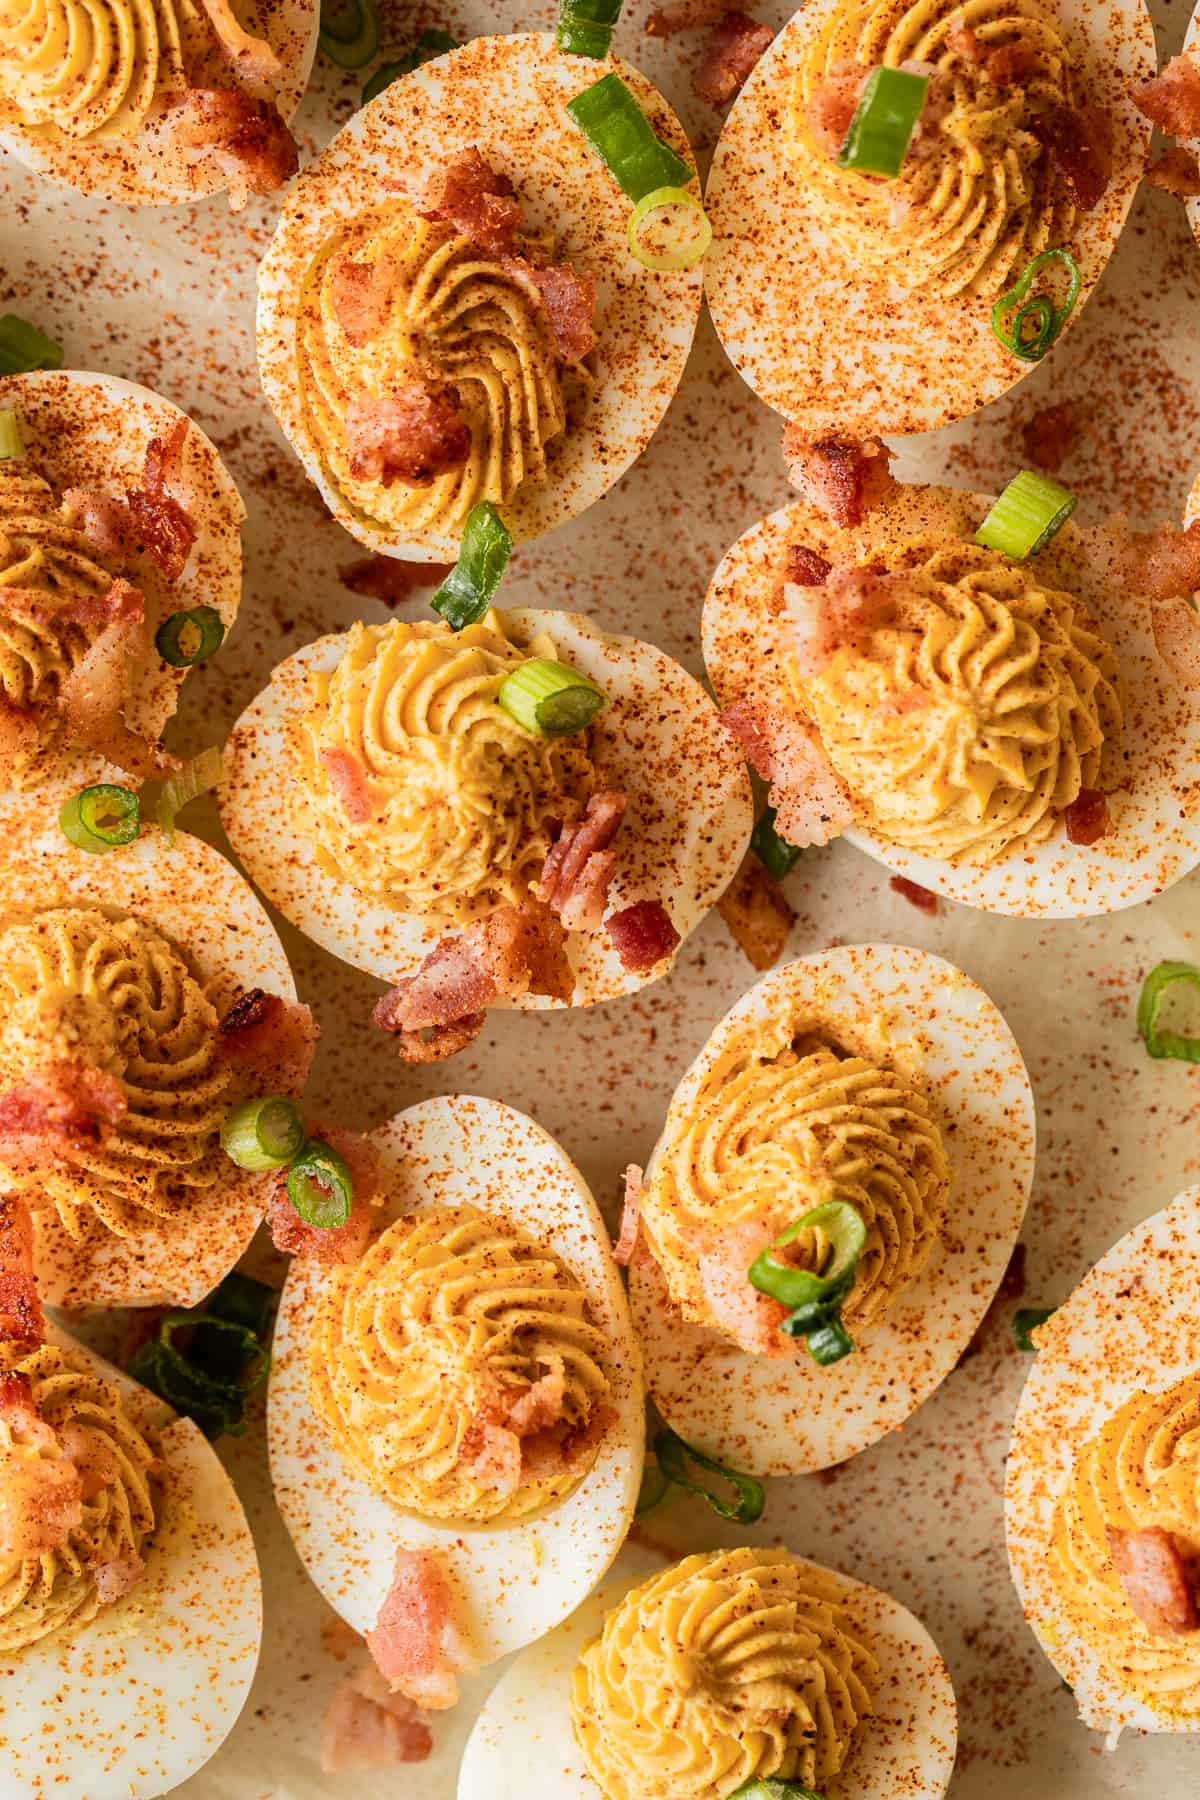 An overview shot of smoked deviled eggs topped with bacon and paprika on a brown background.